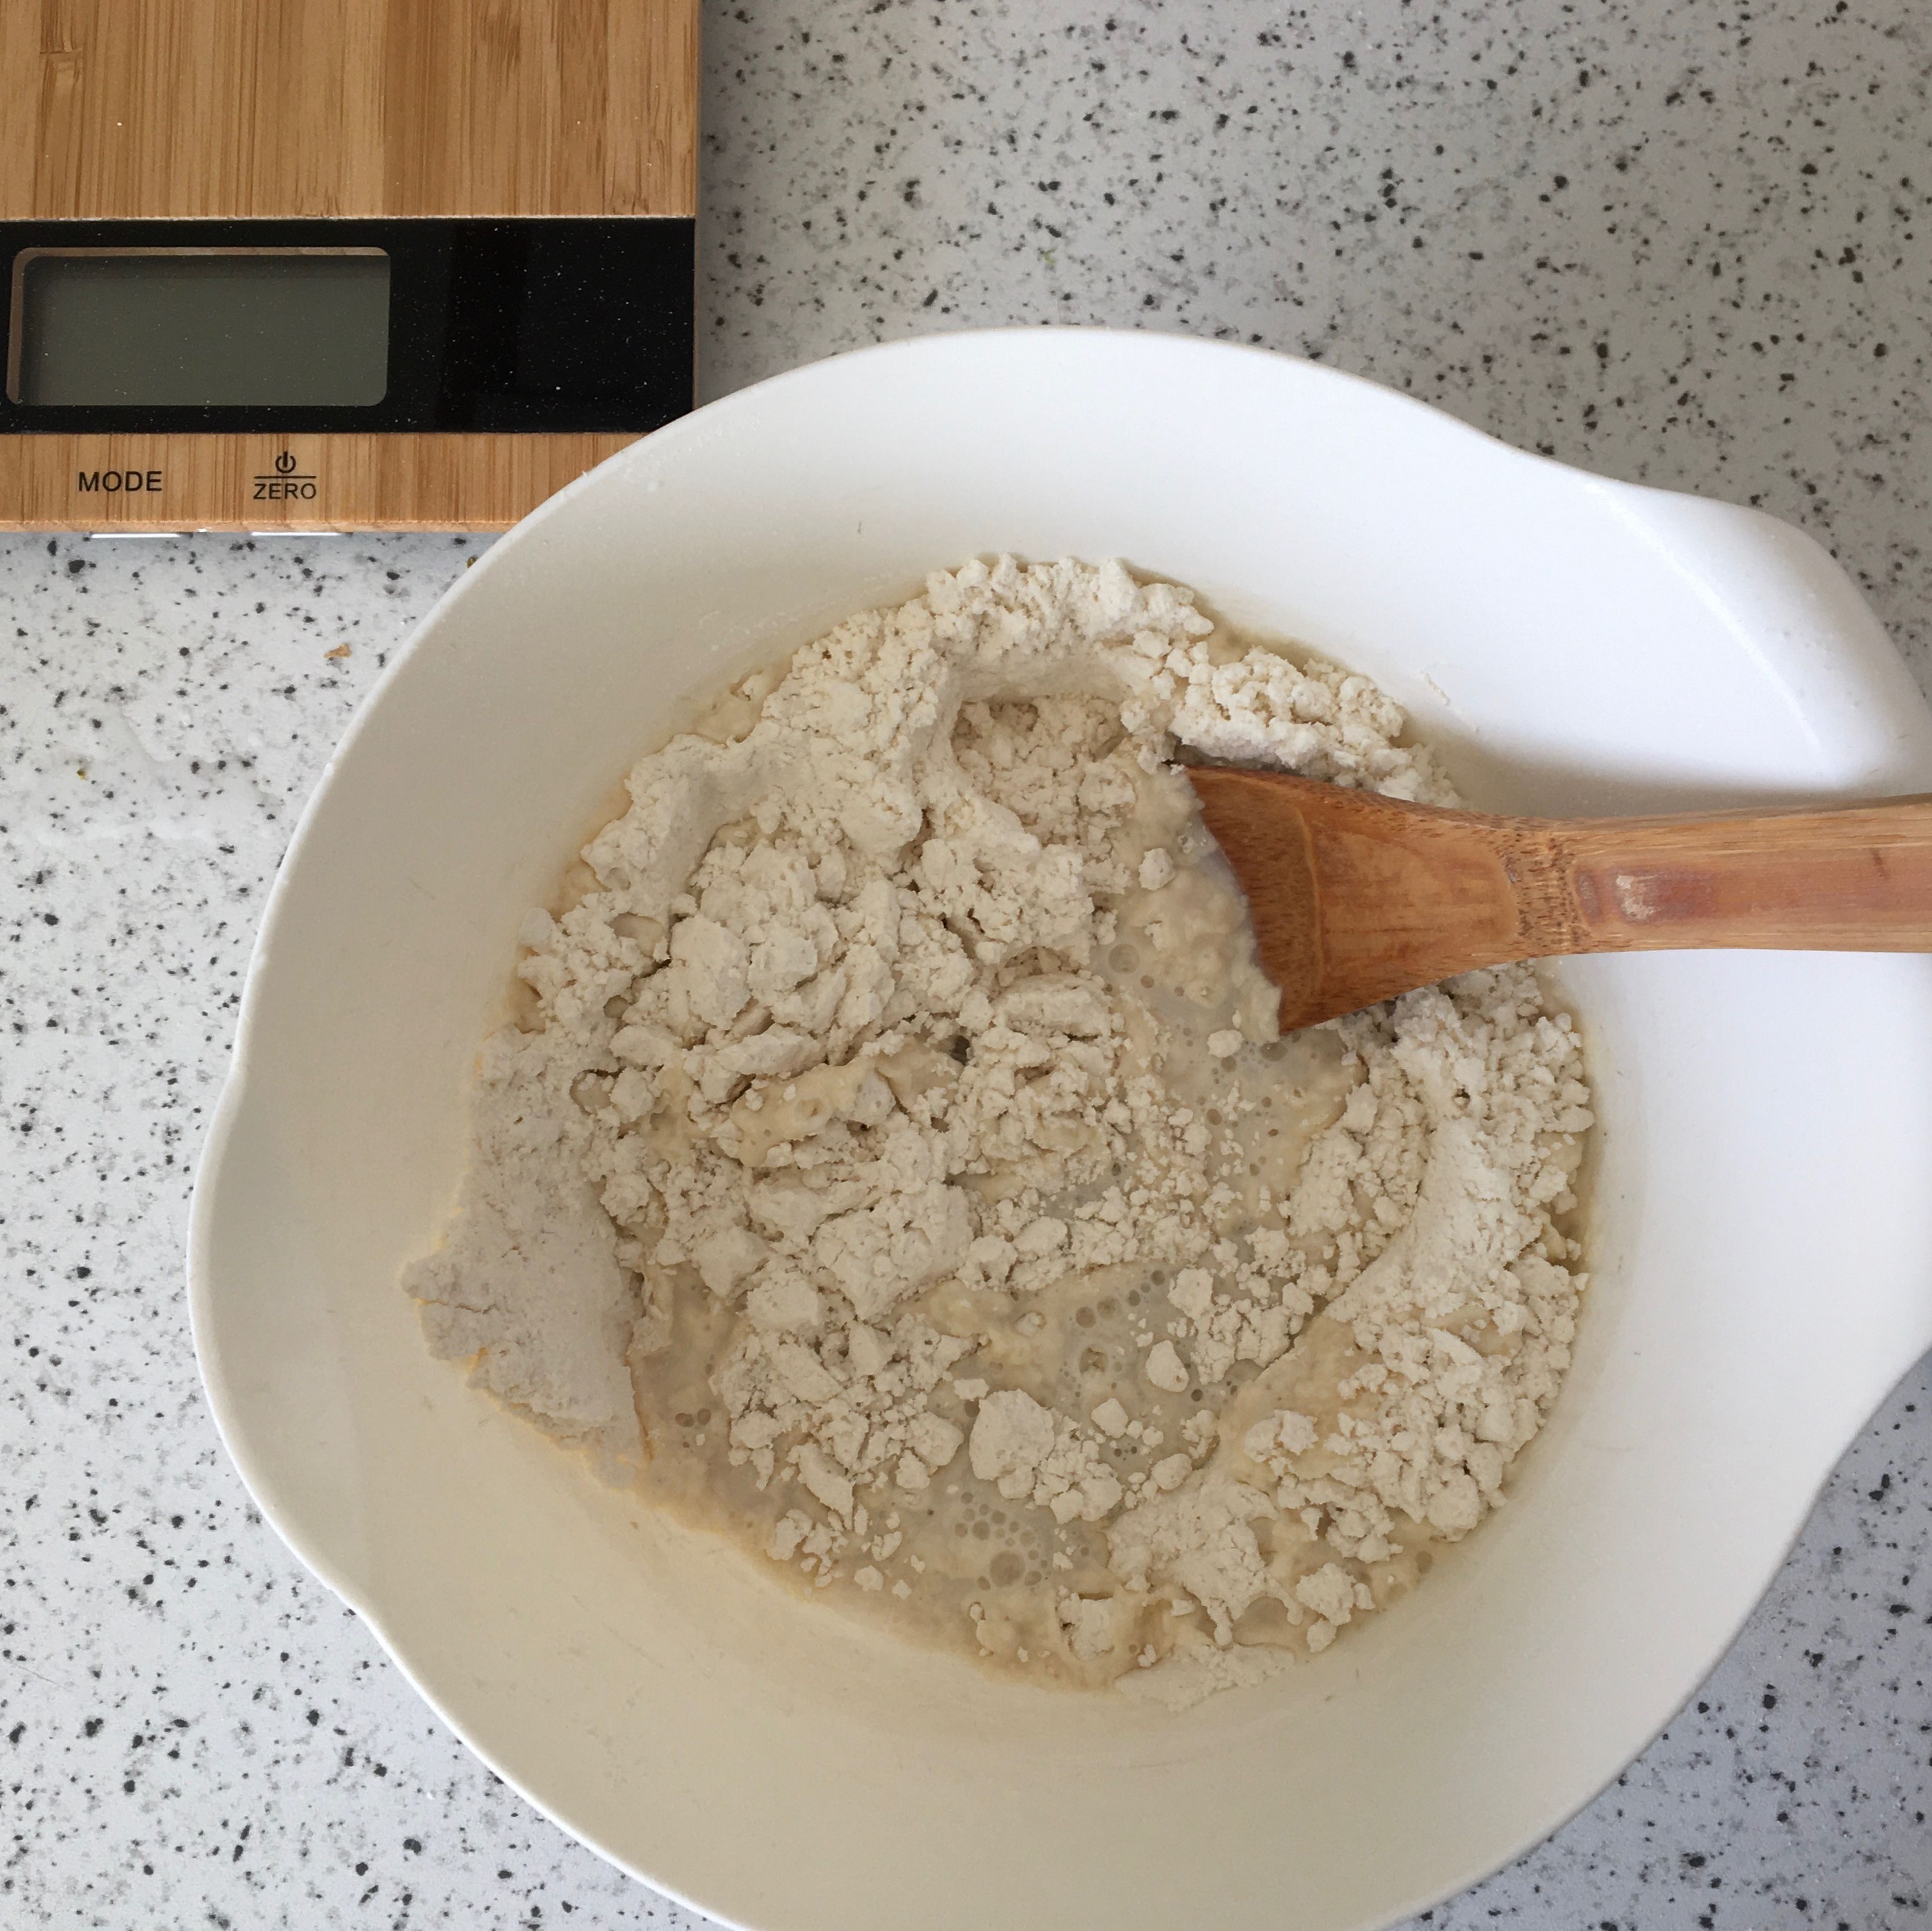 Measure the flour into a bowl. Add the yeast, salt and sugar. Pour in the water and mix with a wooden spoon until a sticky dough starts to come together.